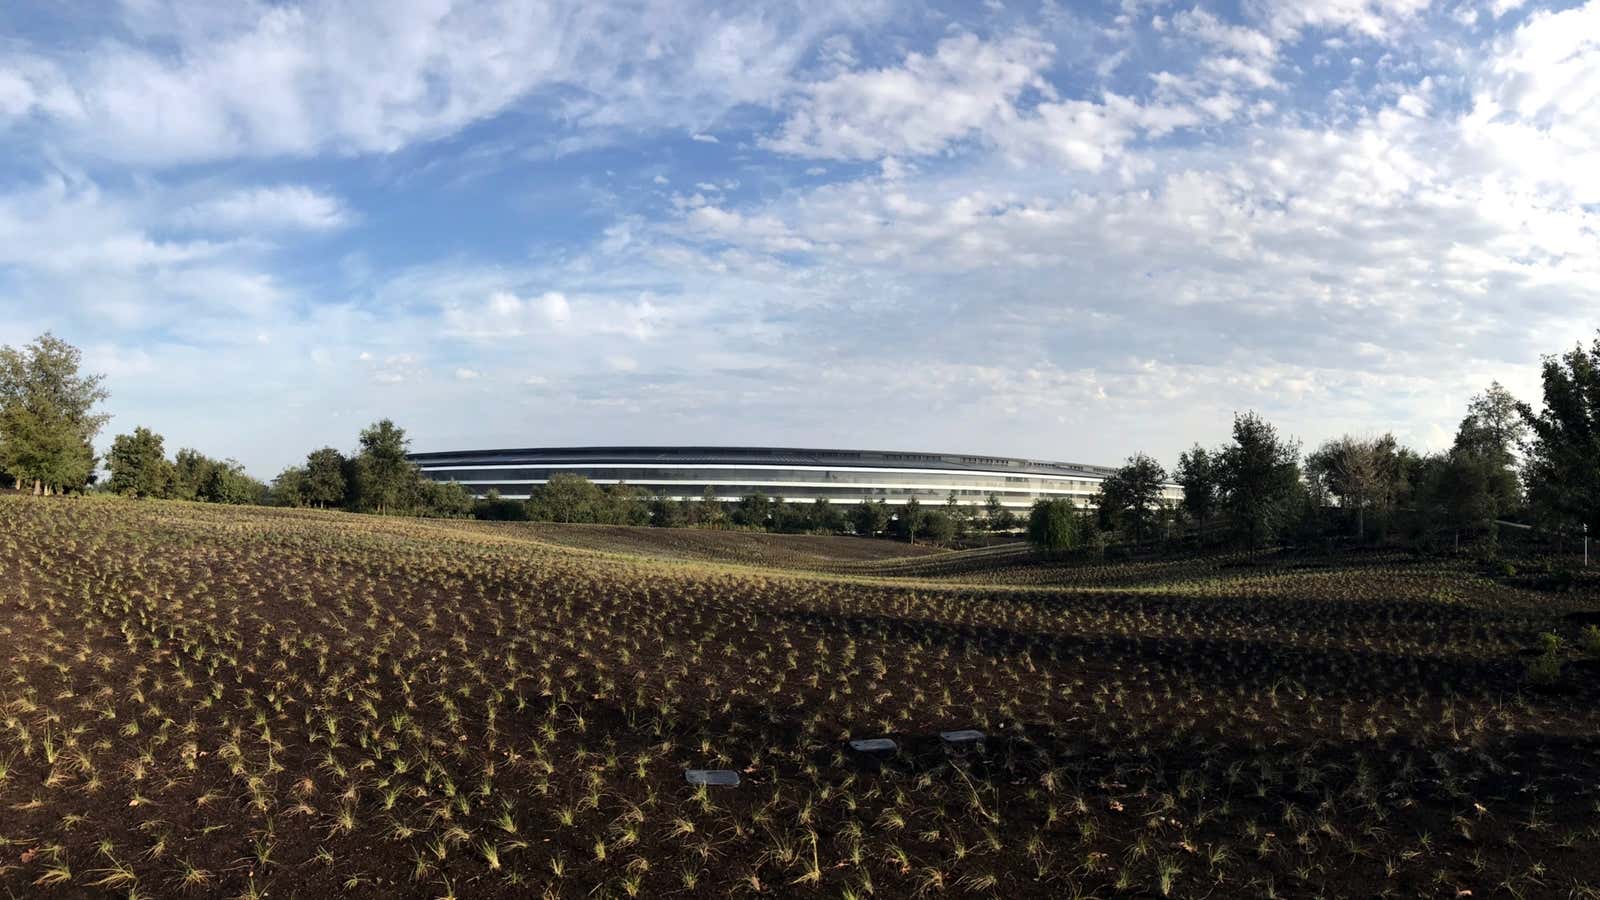 The new Apple campus, as seen from the hill next to the Steve Jobs Theater.